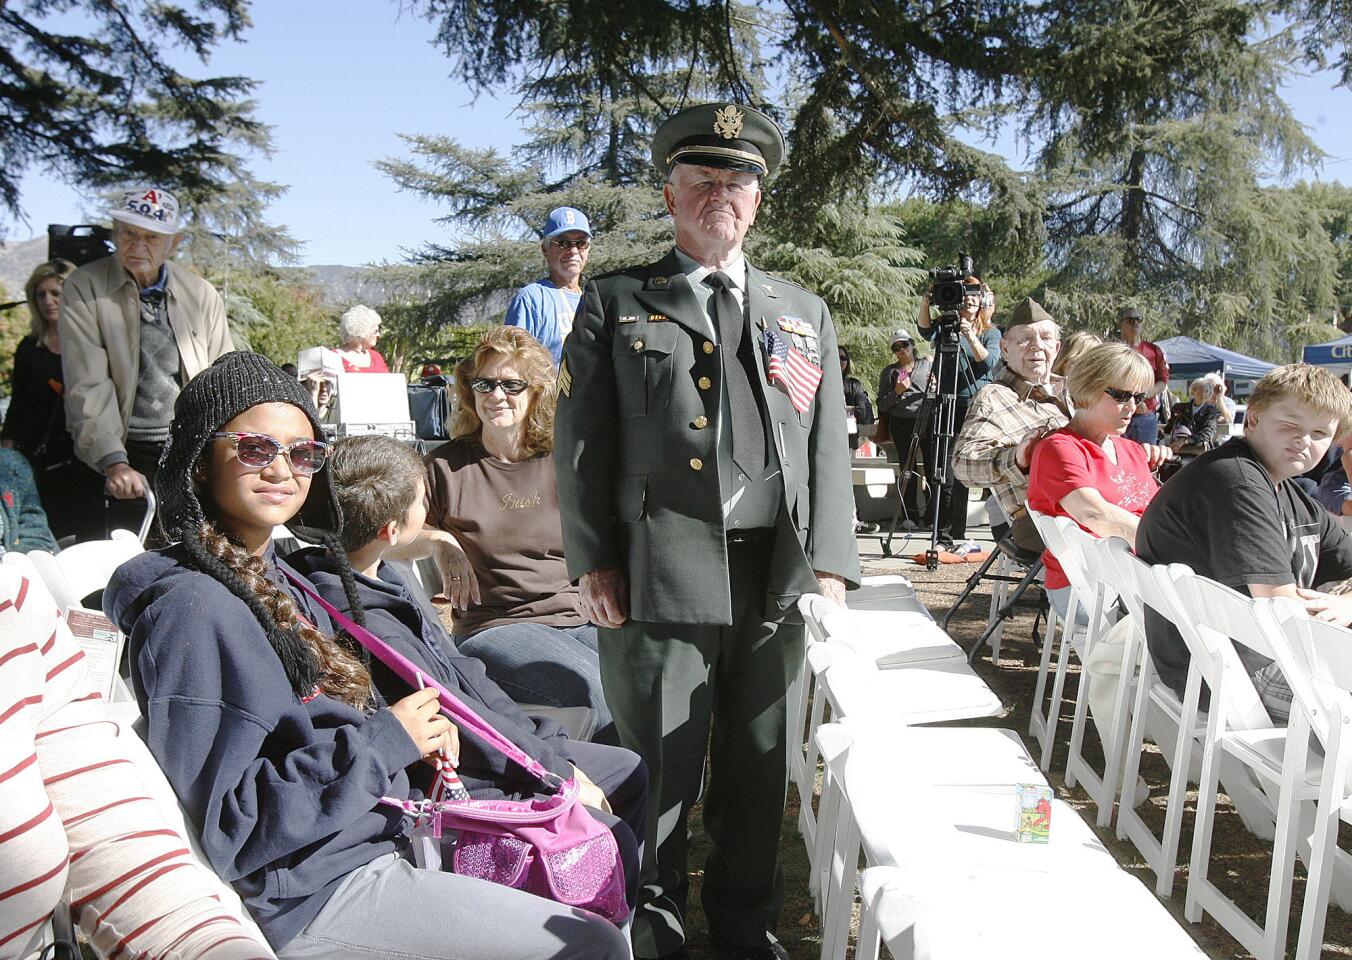 Ray Ackerman, of Burbank, who served in the Army in 1951, stands as the military anthem for the Army, "The Army Song" is played and sung at the Veterans Day Ceremony at McCambridge Park War Memorial in Burbank on Monday November 12, 2012. The event was sponsored by the City of Burbank and the Burbank Veterans Committee.